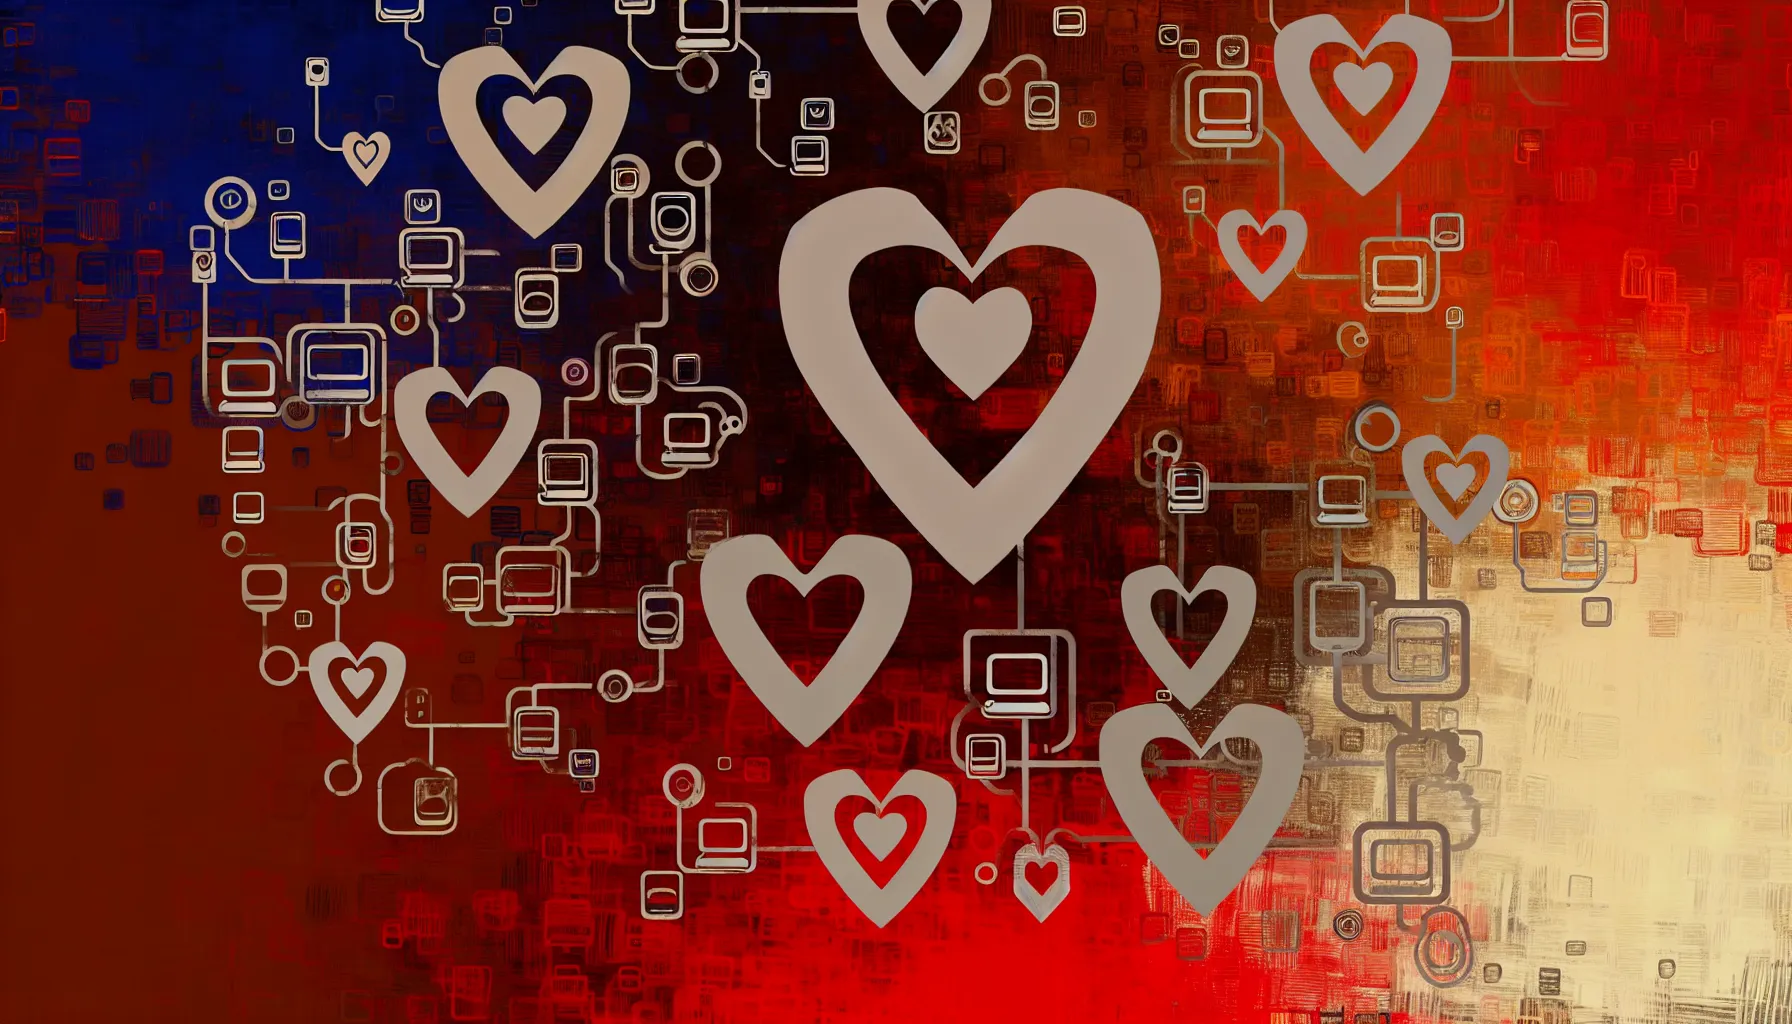 <strong>When Hearts Collide in the Digital Sphere:</strong> An abstract portrayal of how our pursuit of connection weaves through the tapestry of social media, blurring the lines between innocent interaction and emotional entanglement.